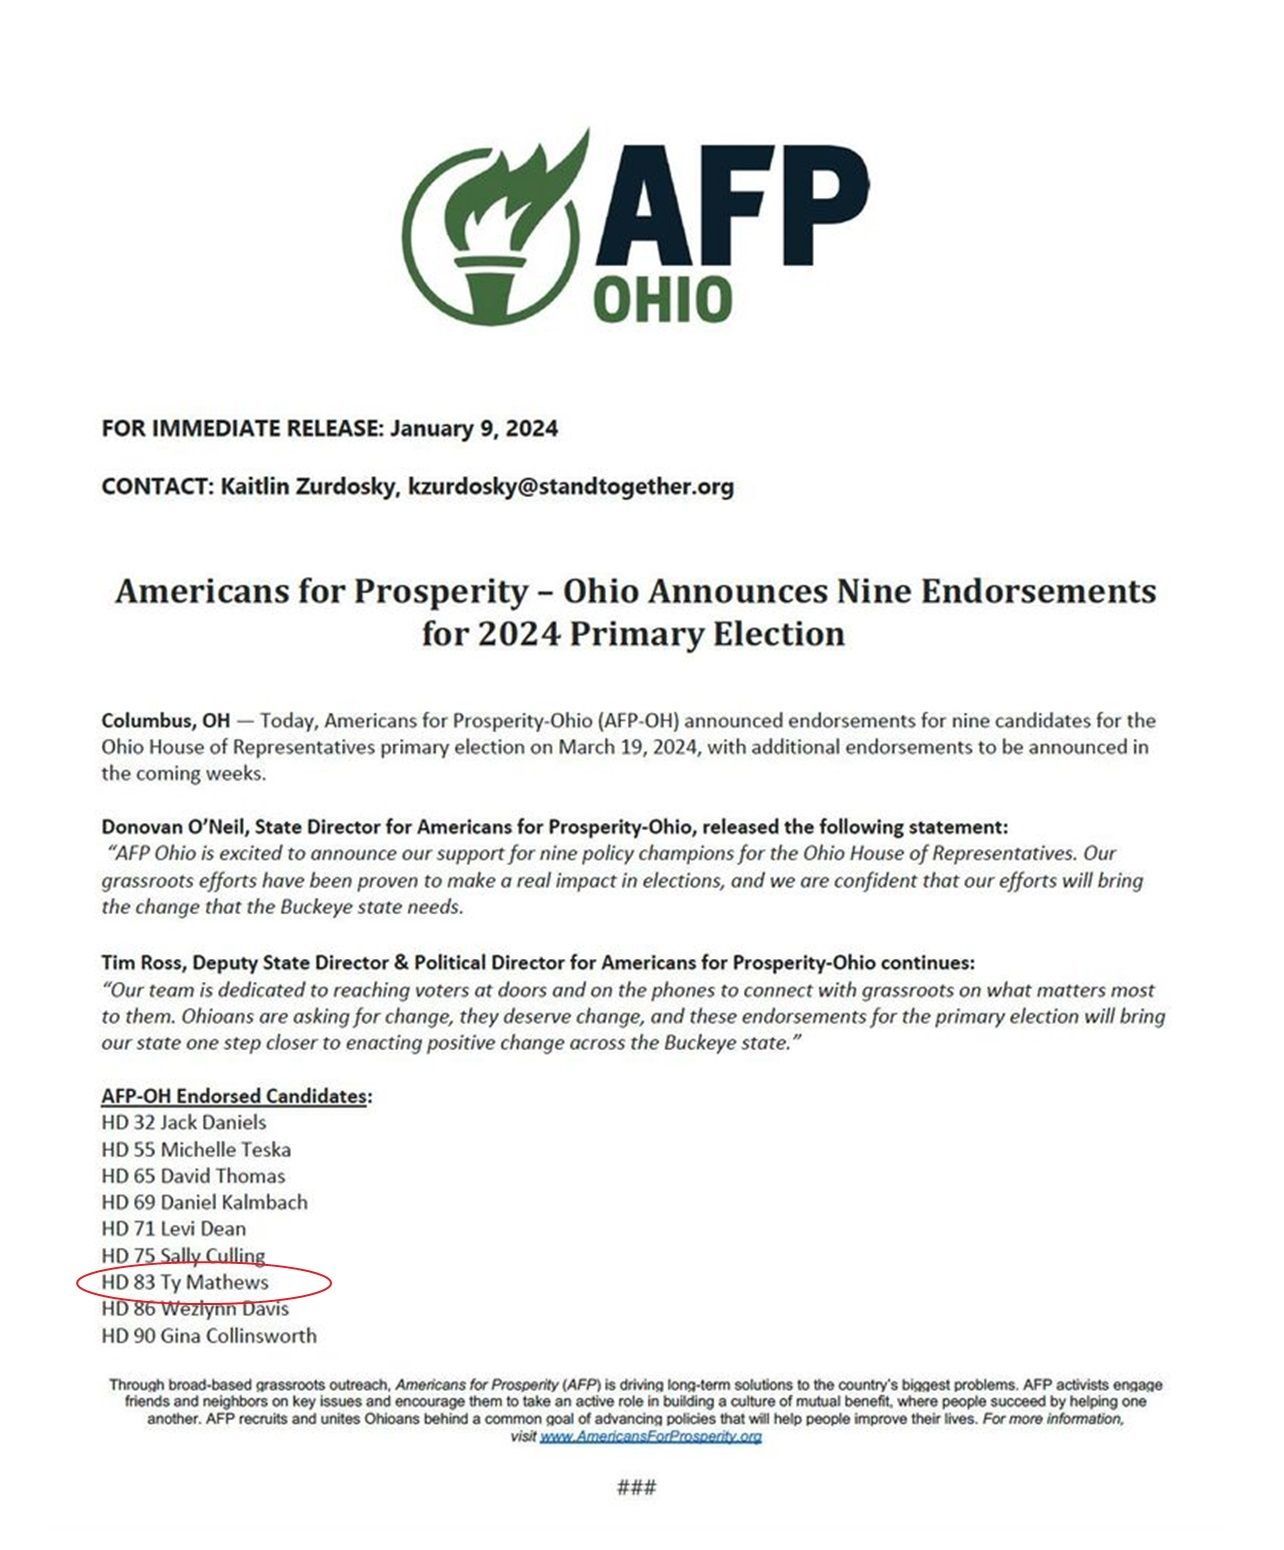 Americans for Prosperity Endorsement Ty Mathews for Ohio State Representative District 83